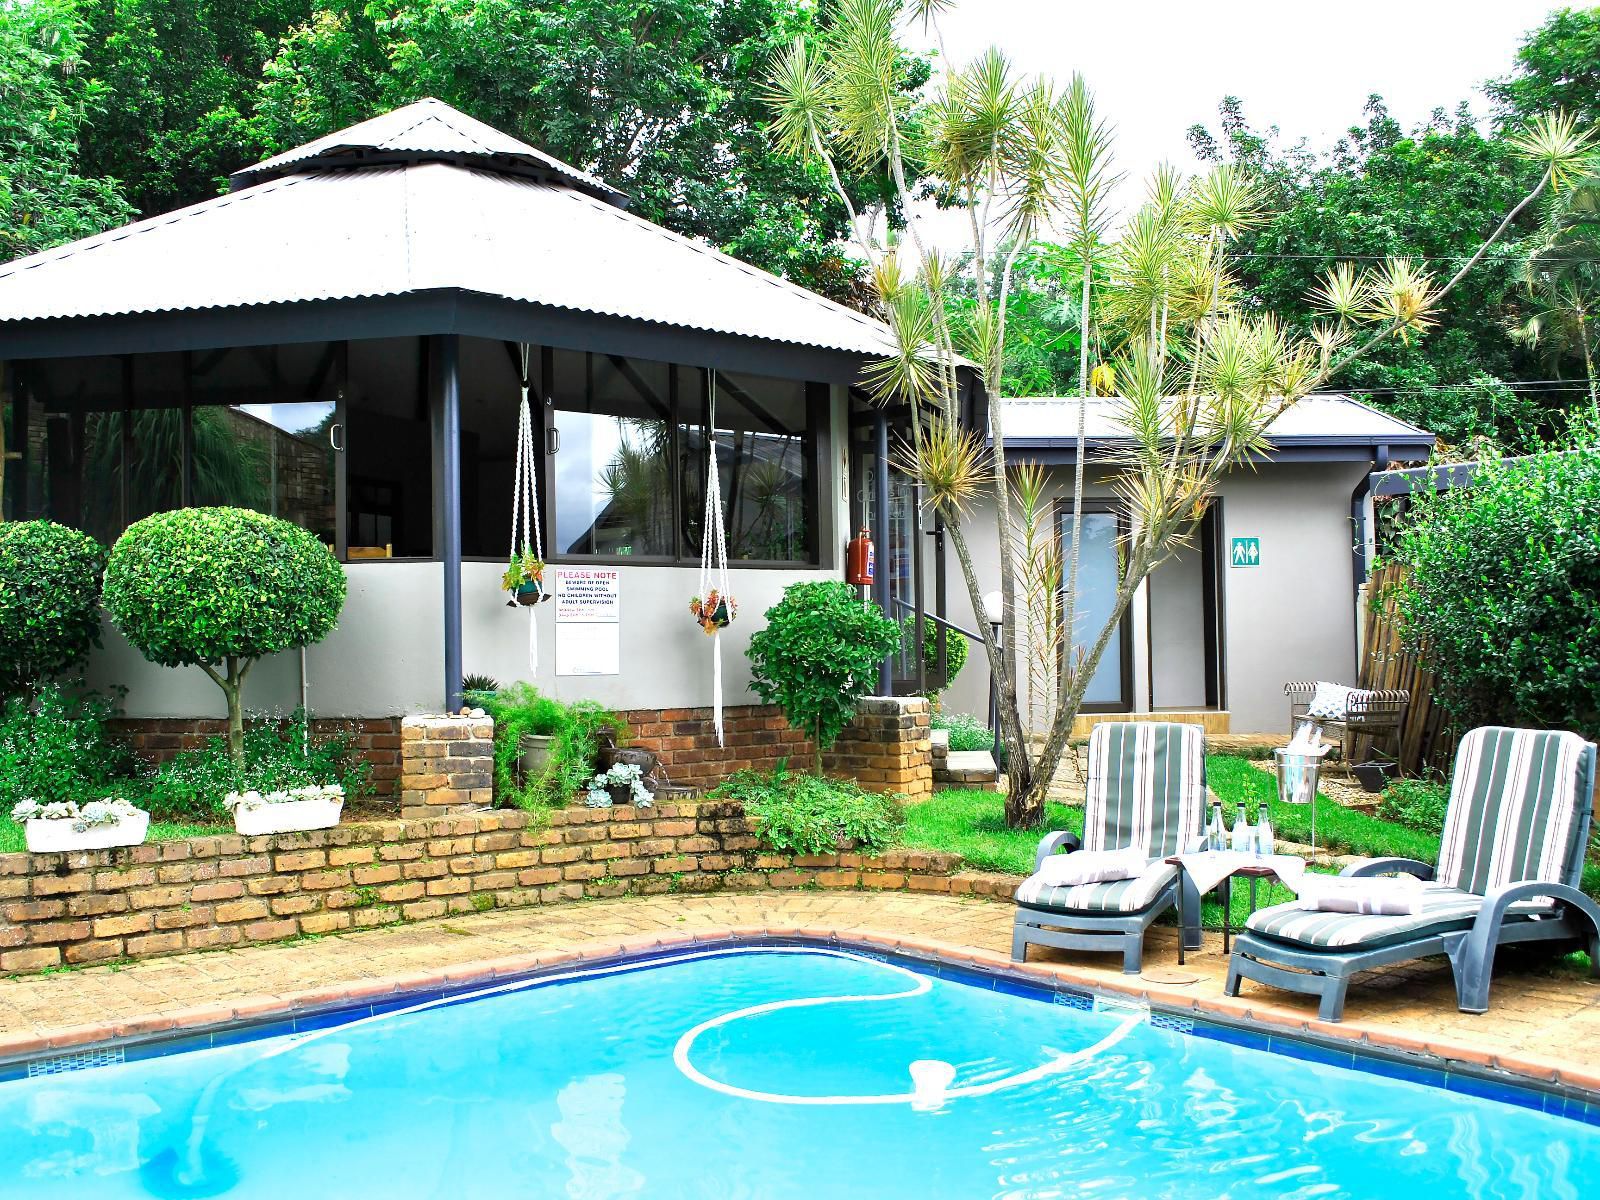 Christie S Inn Tzaneen Limpopo Province South Africa Complementary Colors, House, Building, Architecture, Swimming Pool